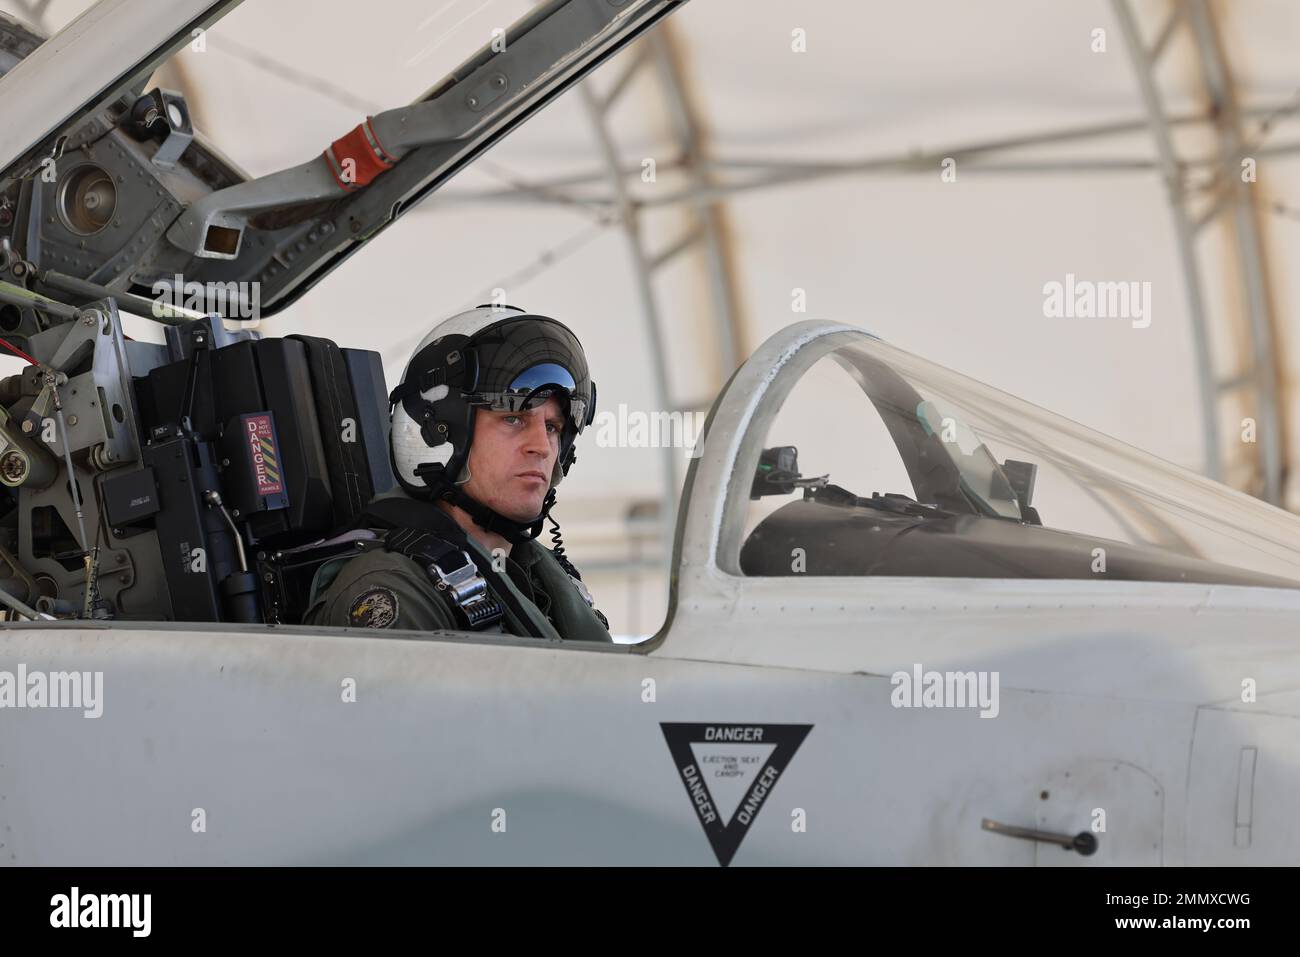 U.S. Marine Corps Maj. Benjamin Vanwingerden, pilot, Marine Fighter Training Squadron 401 (VMFT-401), Marine Aircraft Group 41 (MAG-41), 4th Marine Aircraft Wing (4th MAW), conducts a pre-flight check of his F-5N Tiger II before takeoff at Marine Corps Air Station Yuma, Arizona, Sep. 23, 2022. VMFT-401 is a Marine Corps Reserve fighter adversary squadron that represents enemies in simulated air battles against Marine aircrafts. Stock Photo